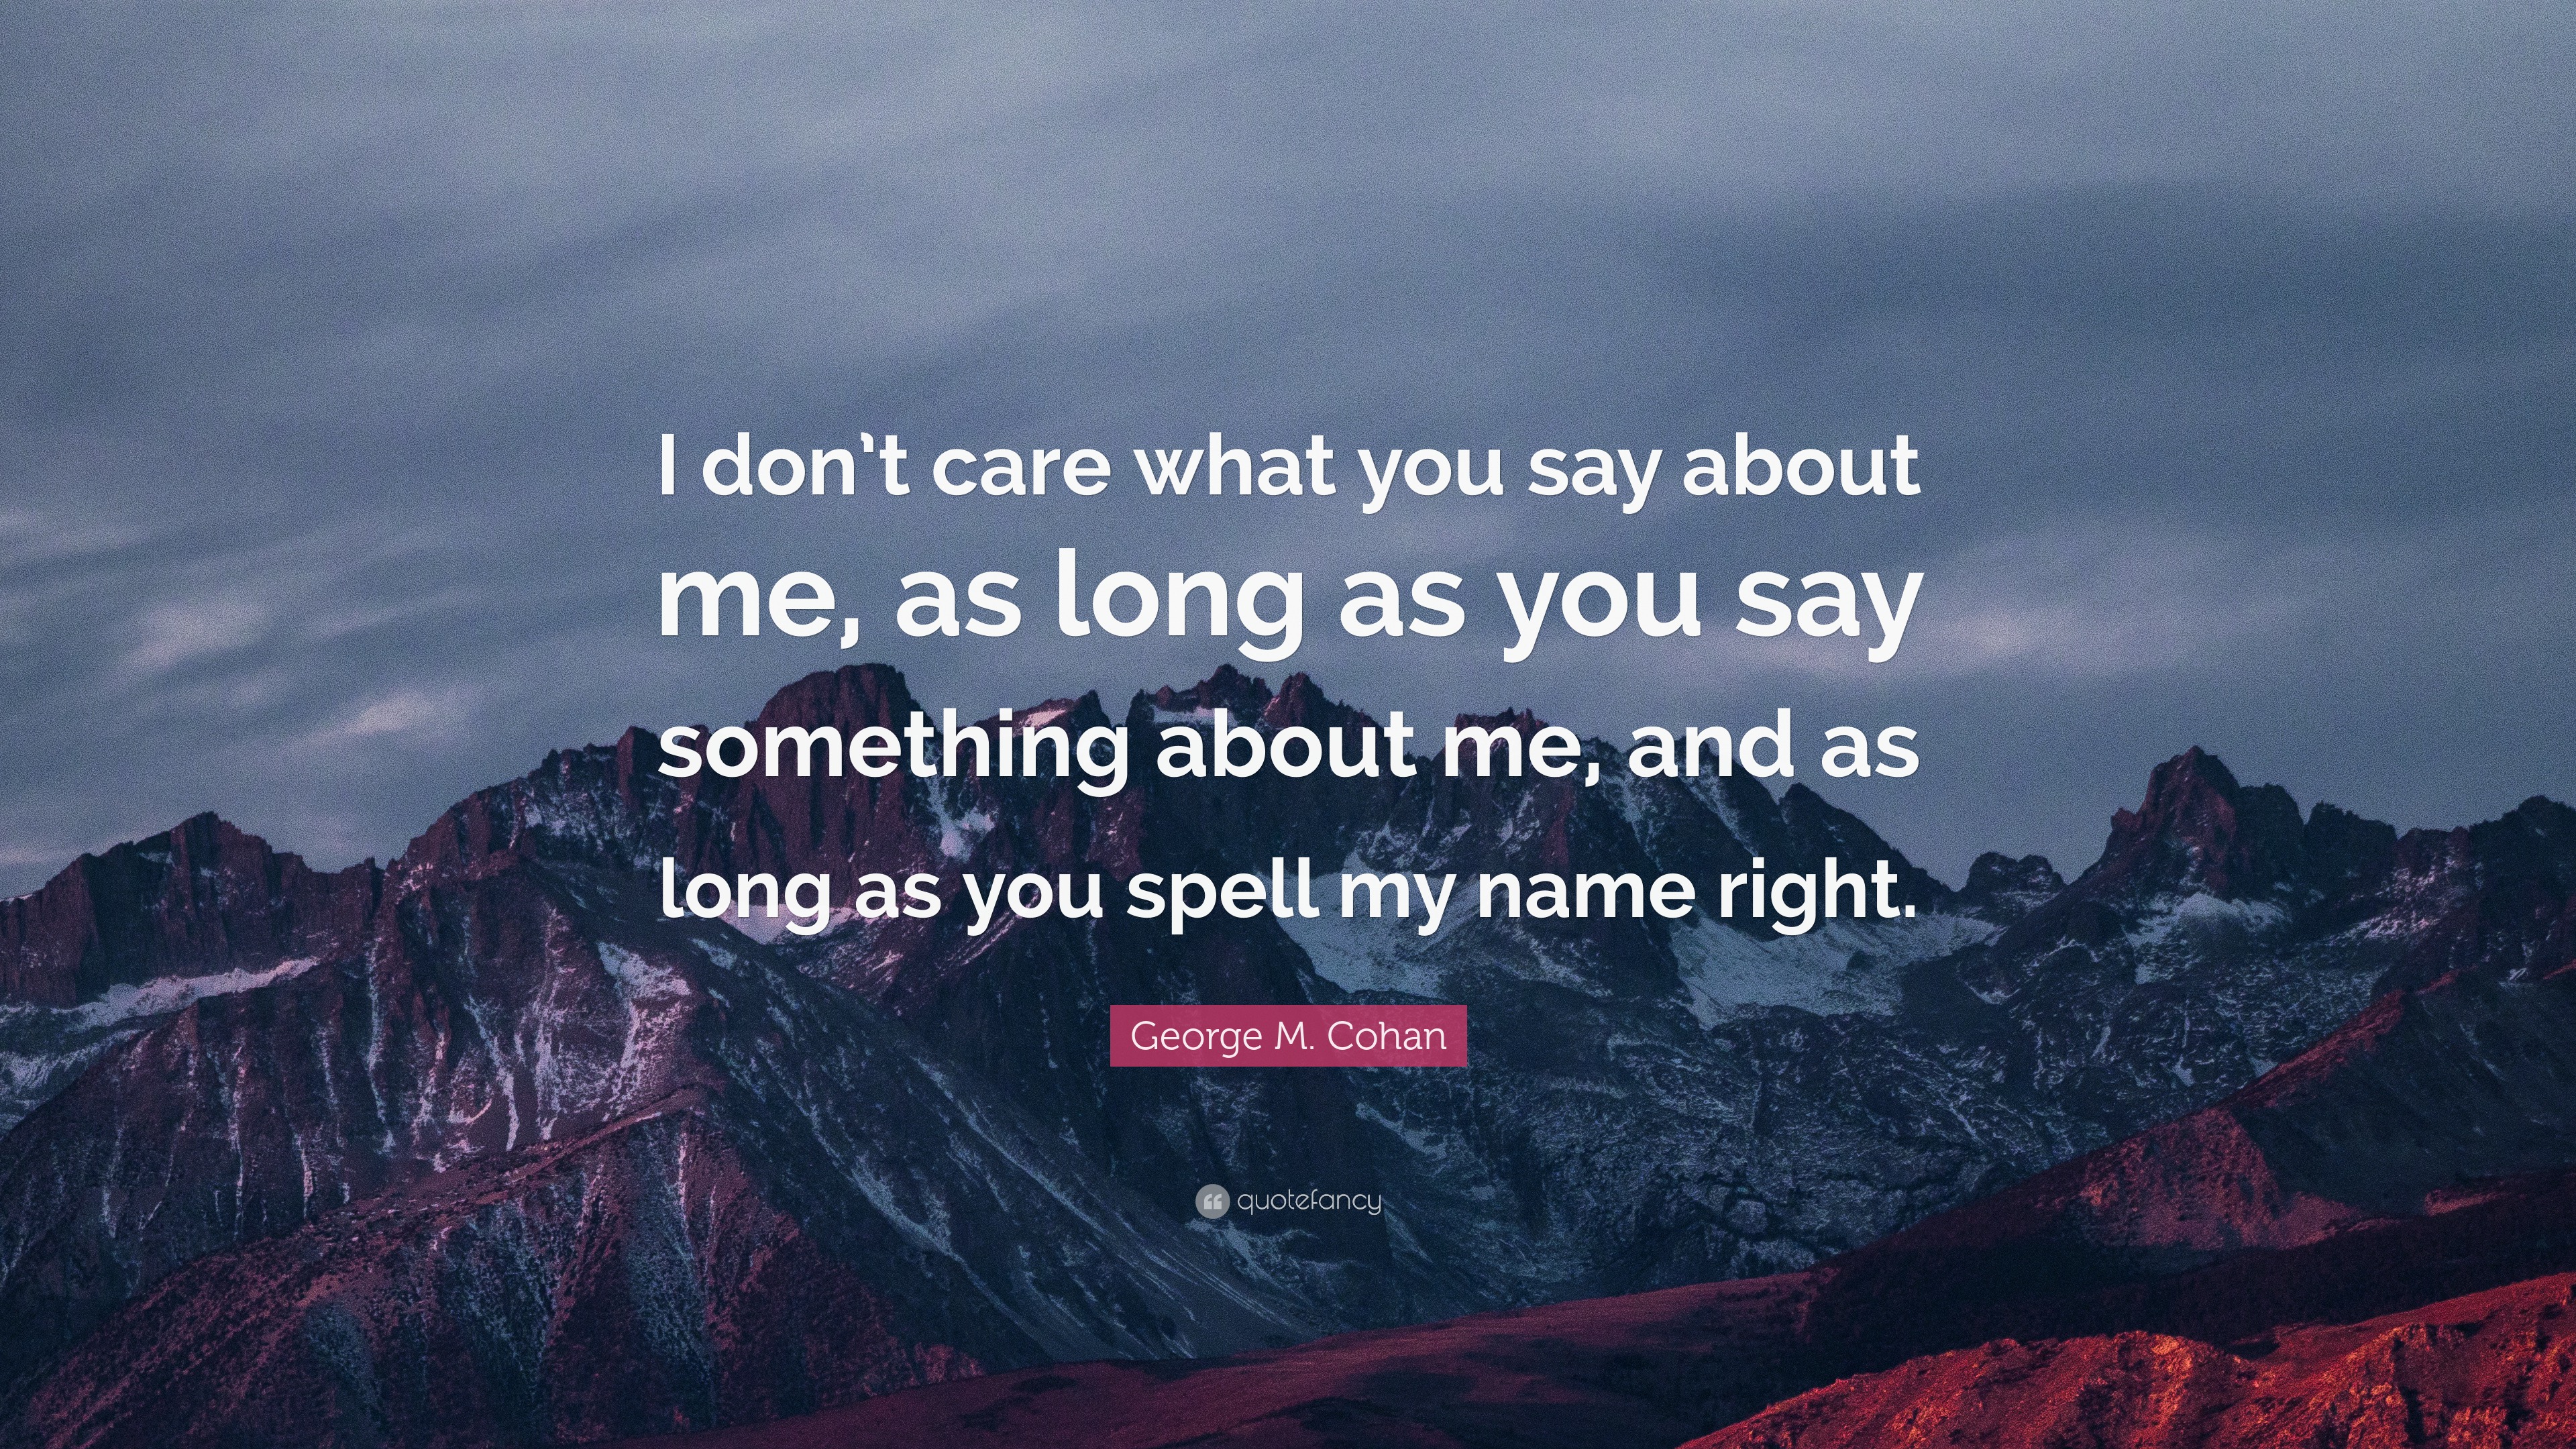 George M. Cohan Quote: “I don’t care what you say about me, as long as ...